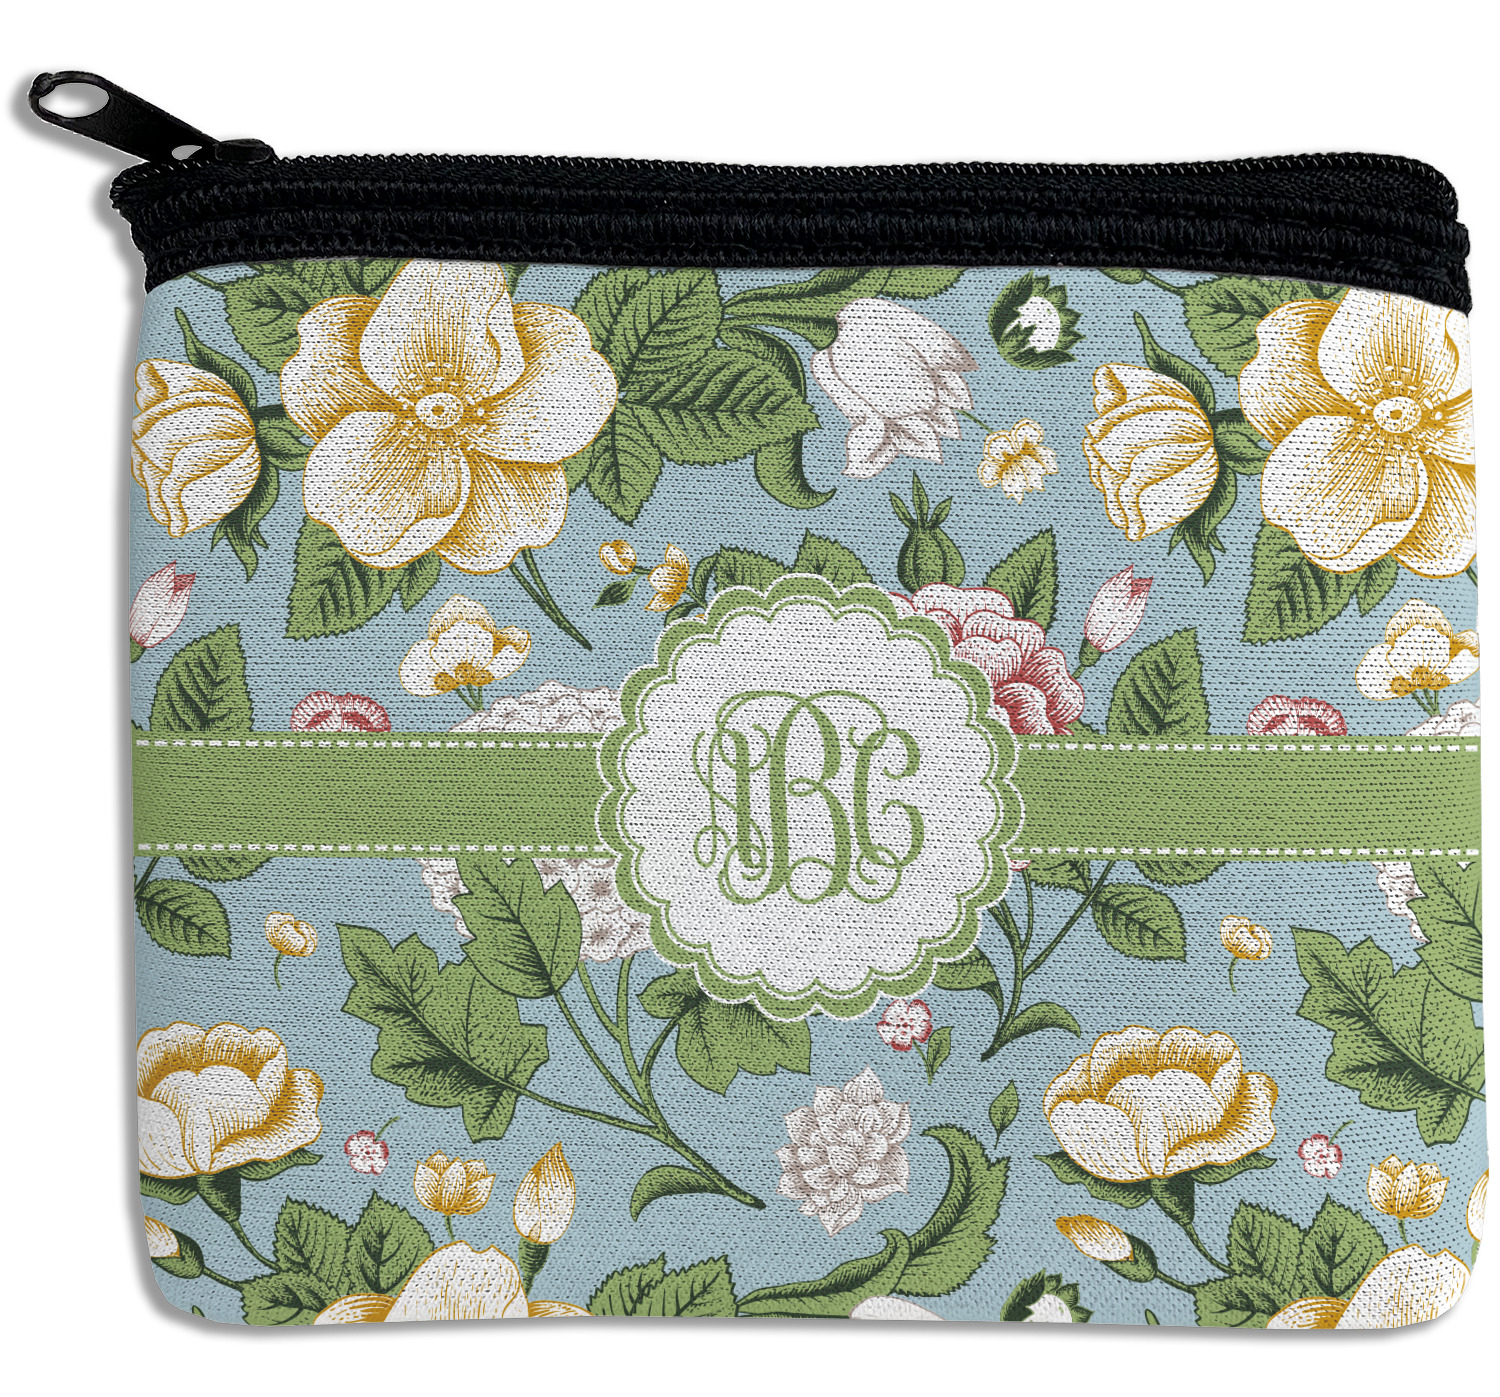 Personalized Floral Rectangular Coin Purse 